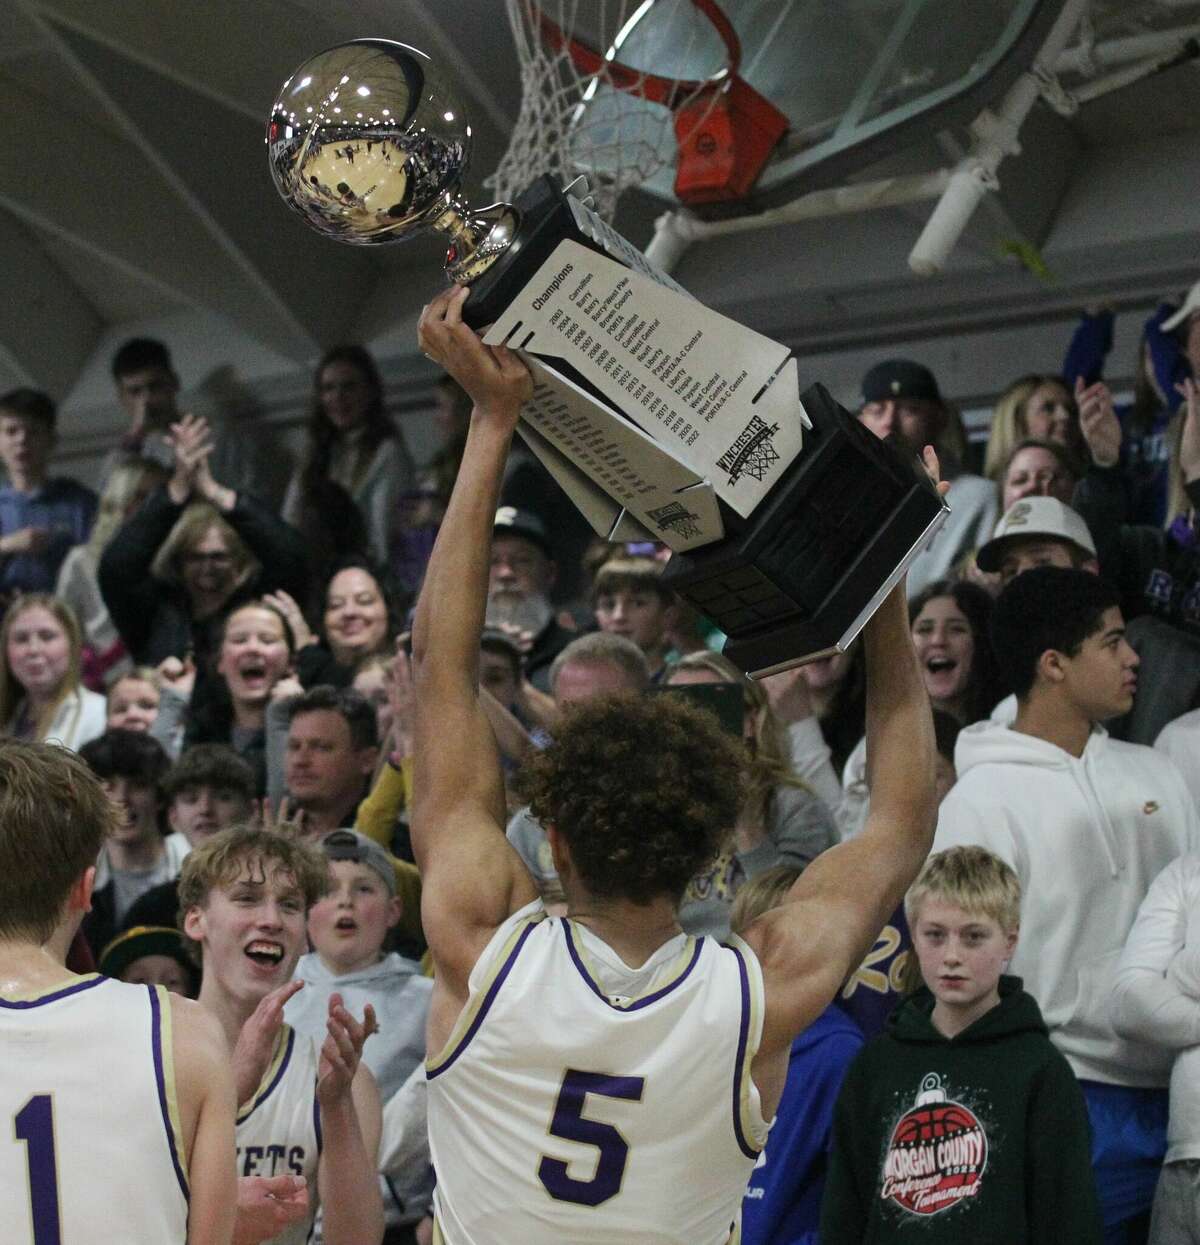 Routt fans cheer as Michael Wilson hoists the trophy after the Rockets beat PORTA/A-C Central to win the championship of the 100th Winchester Invitational Tournament Saturday night in Winchester.